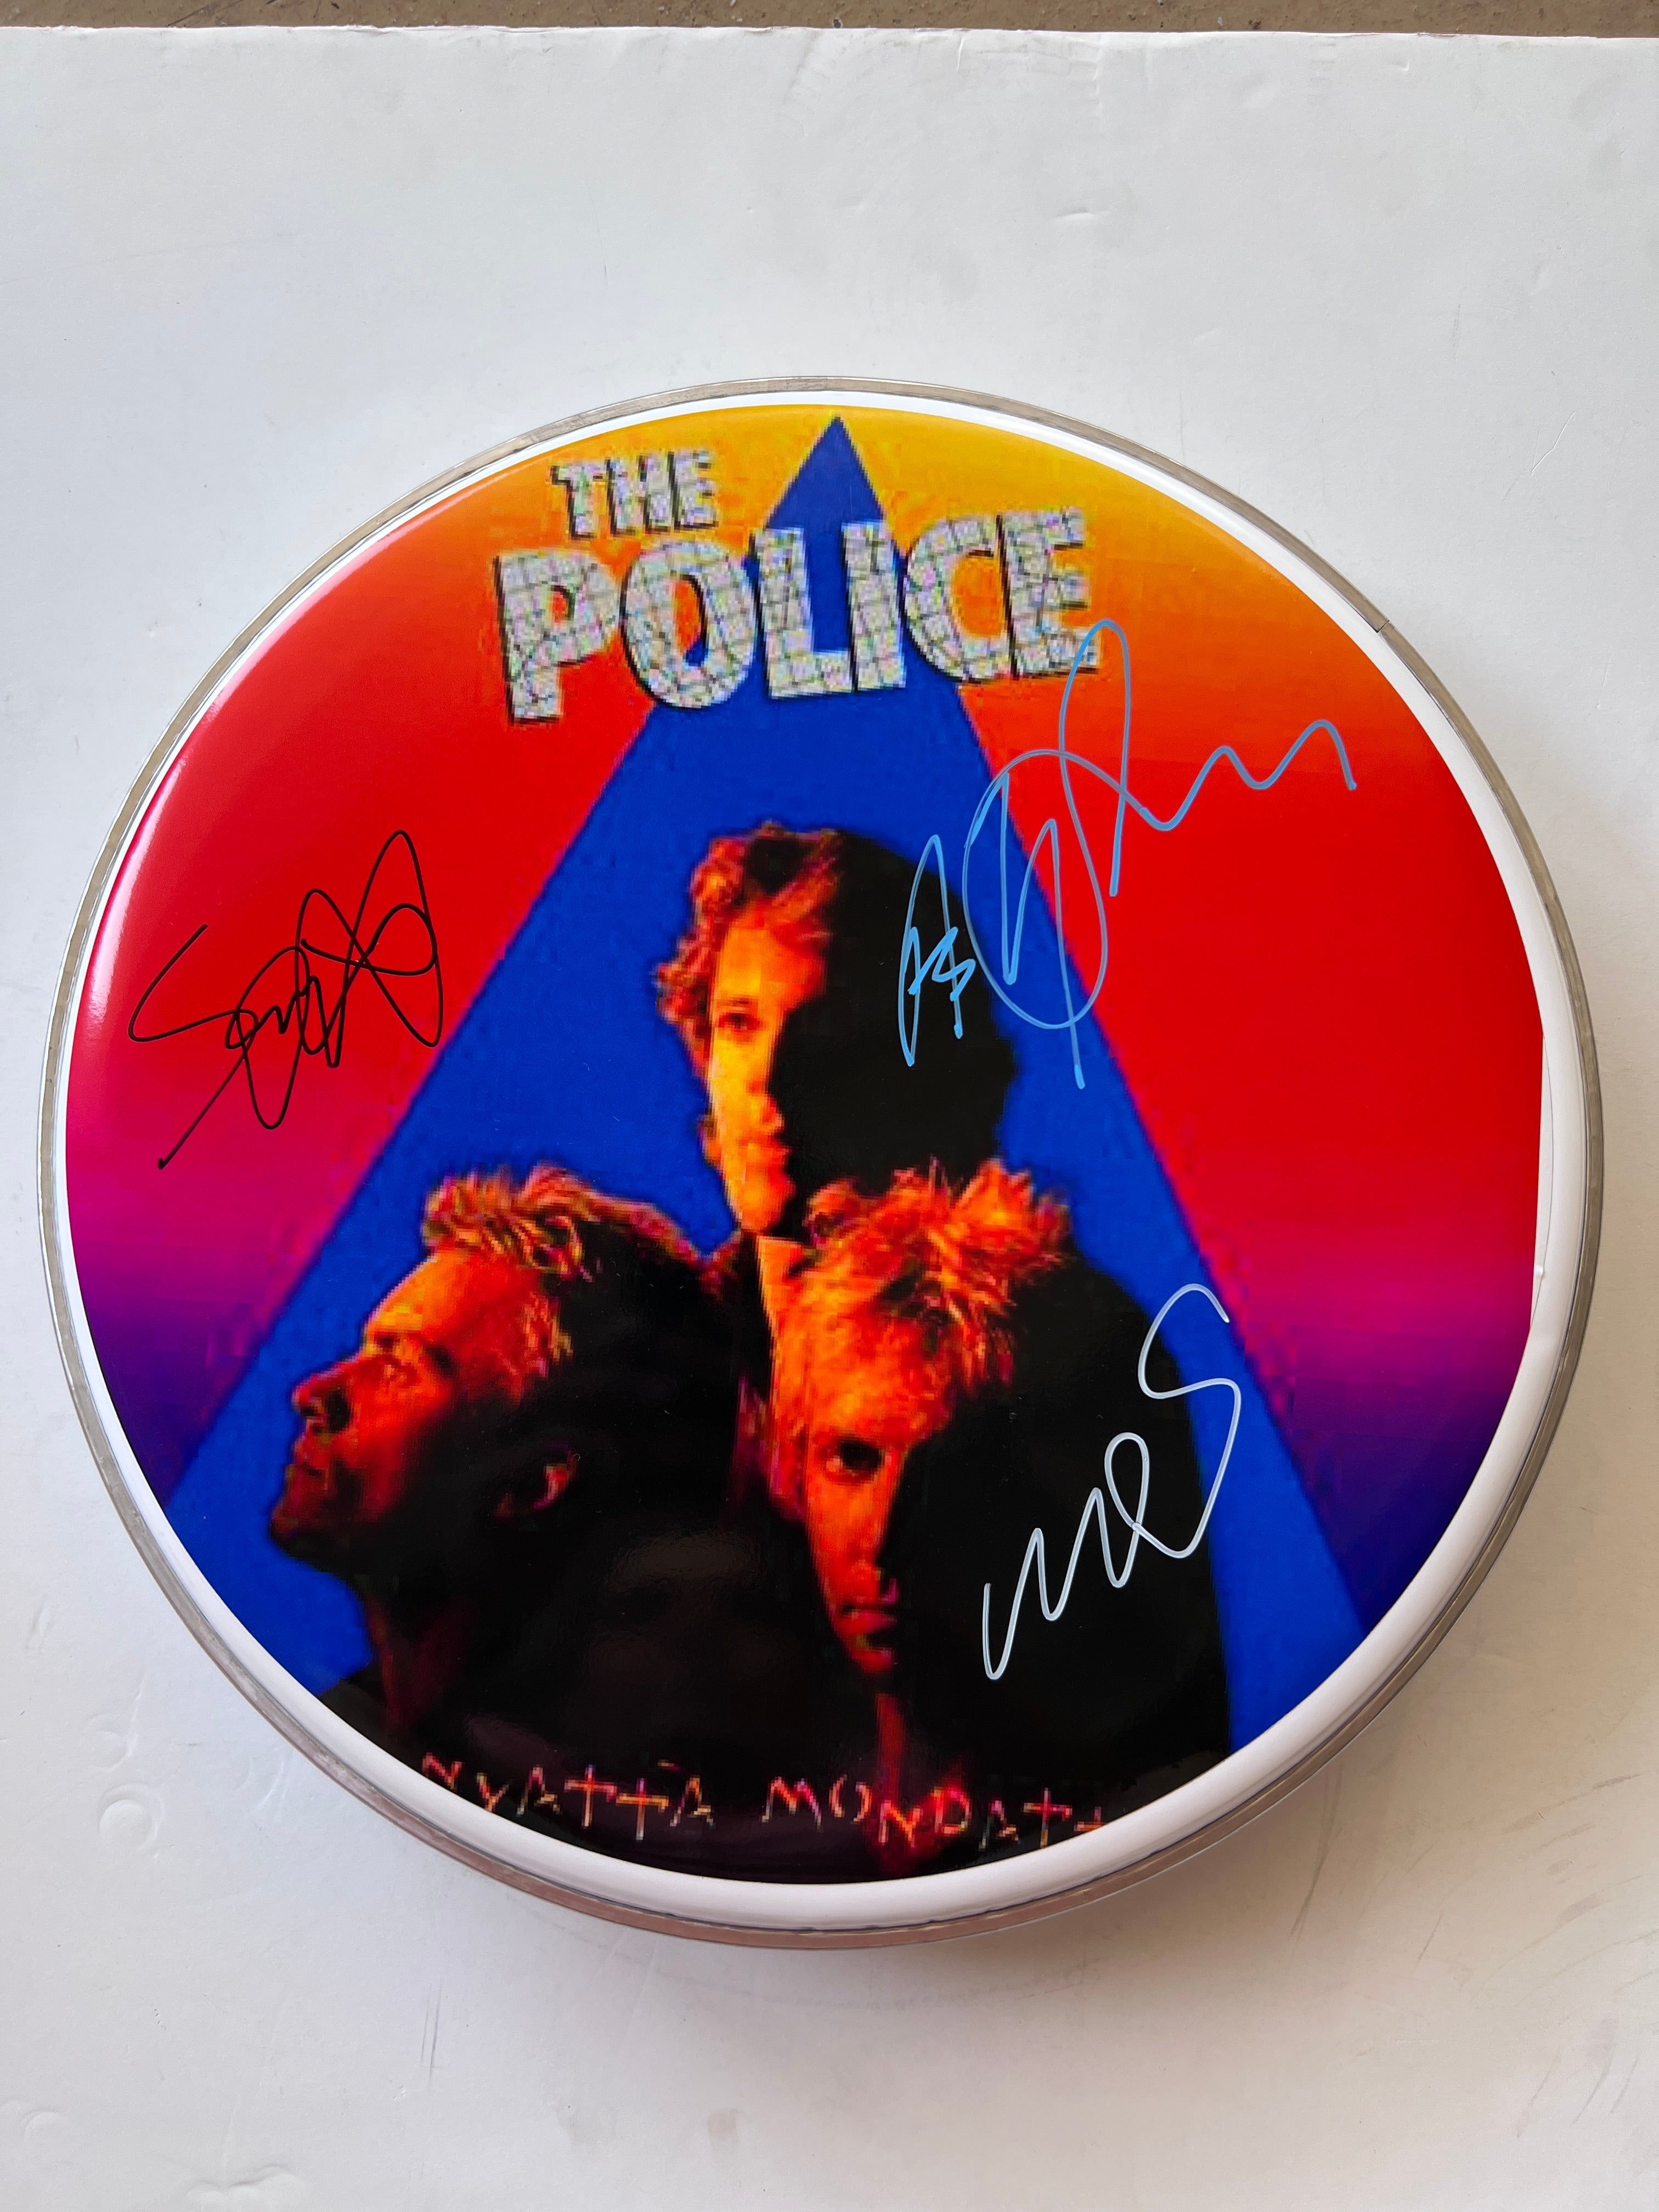 The Police Gordon Sumner "Sting", Stewart Copeland, Andy Summers one-of-a-kind drum head signed with proof